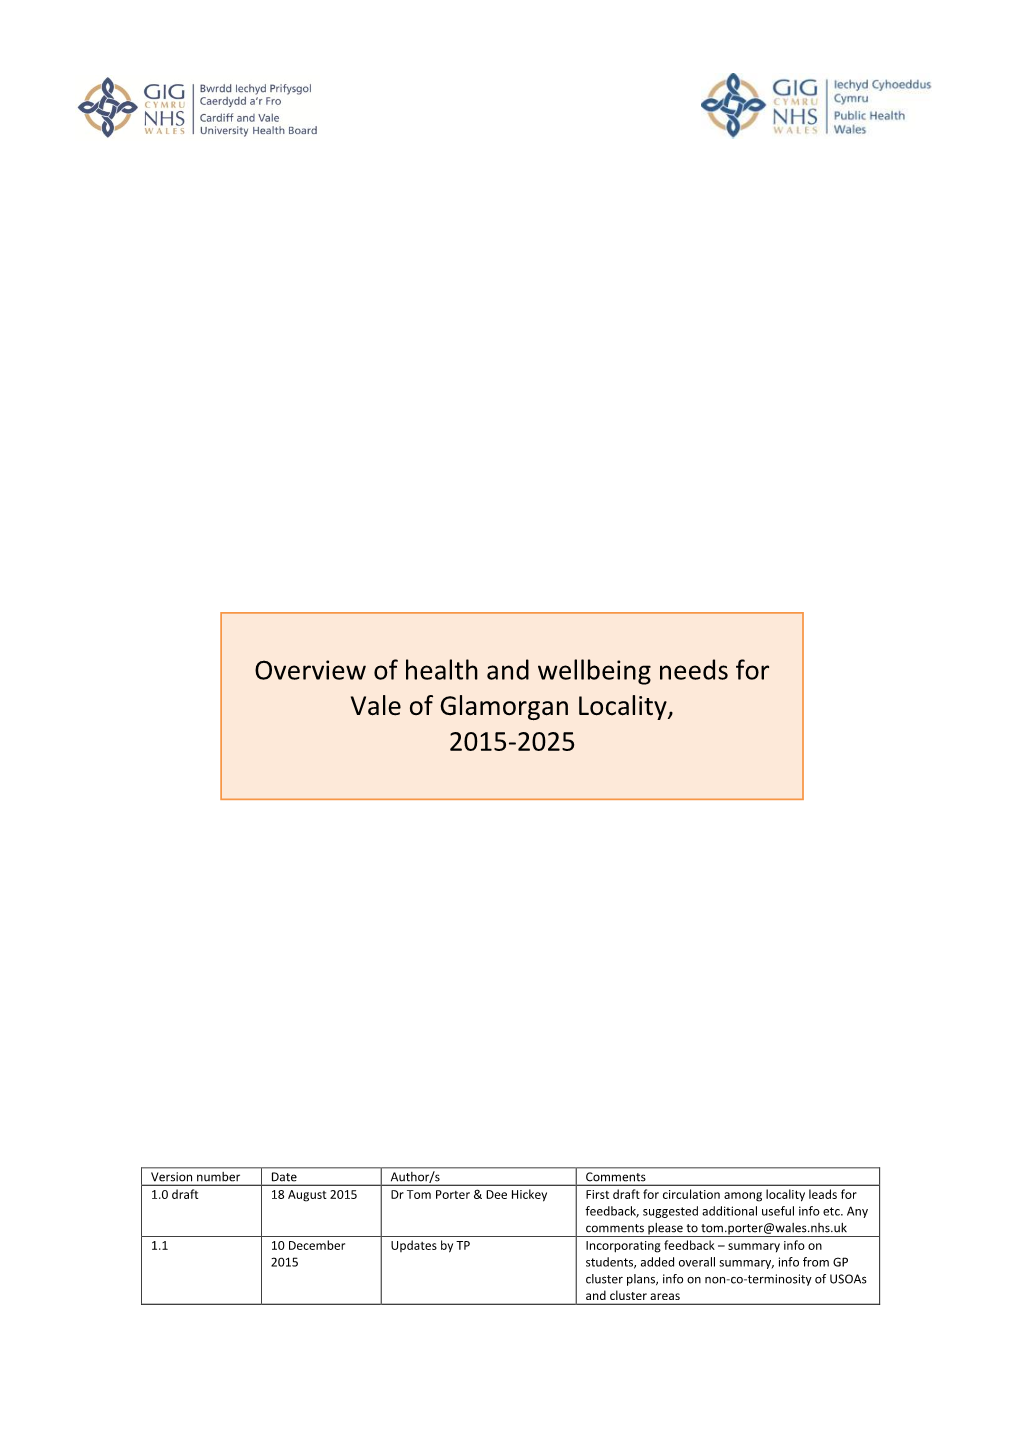 Overview of Health and Wellbeing Needs for Vale of Glamorgan Locality